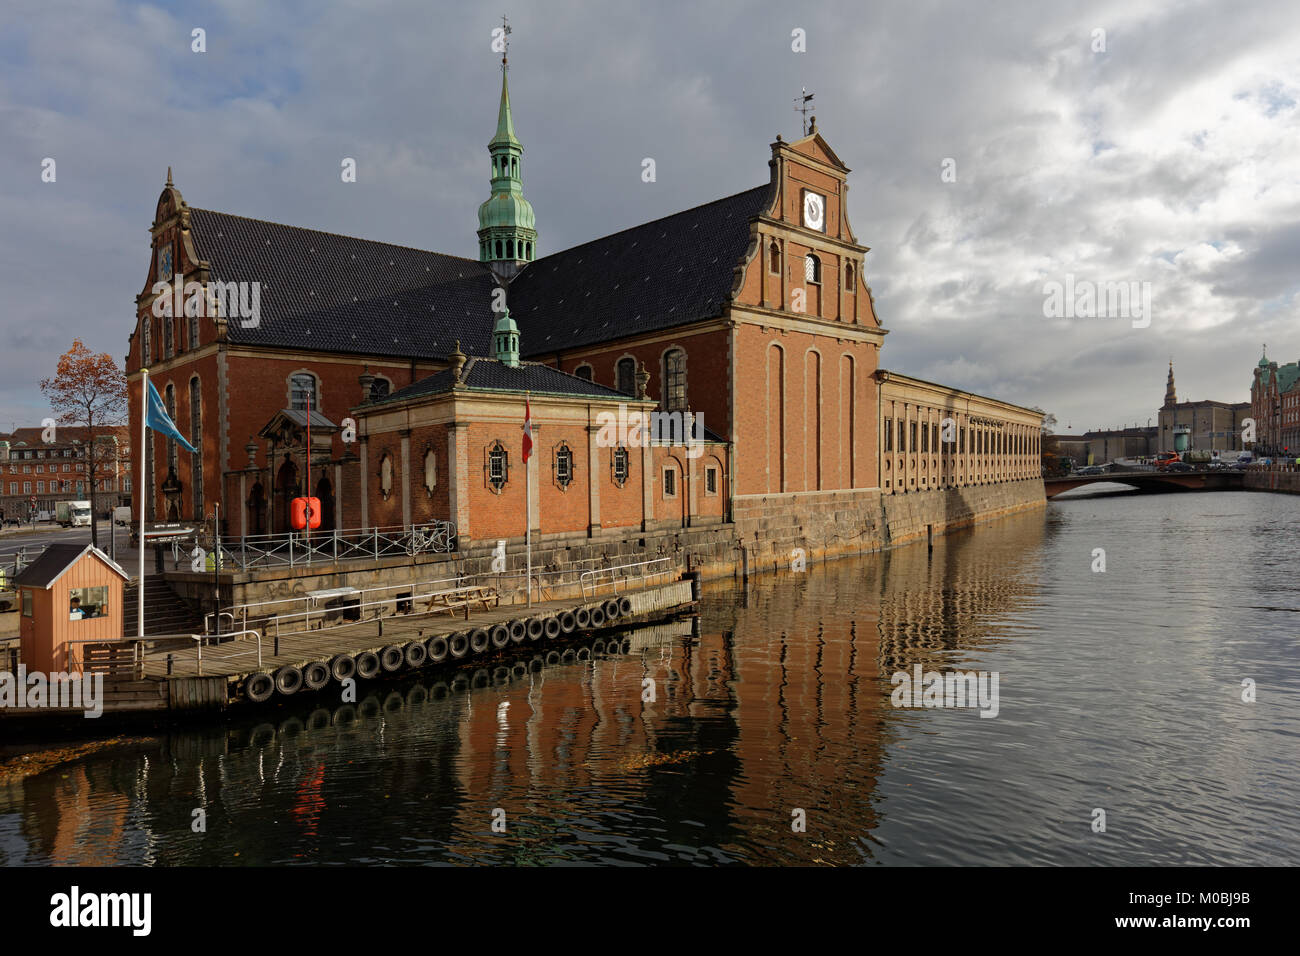 Copenhagen, Denmark - November 7, 2016: Church of Holmen in an autumn day. Built as an anchor forge in 1563, it converted to church in 1619 and hosted Stock Photo